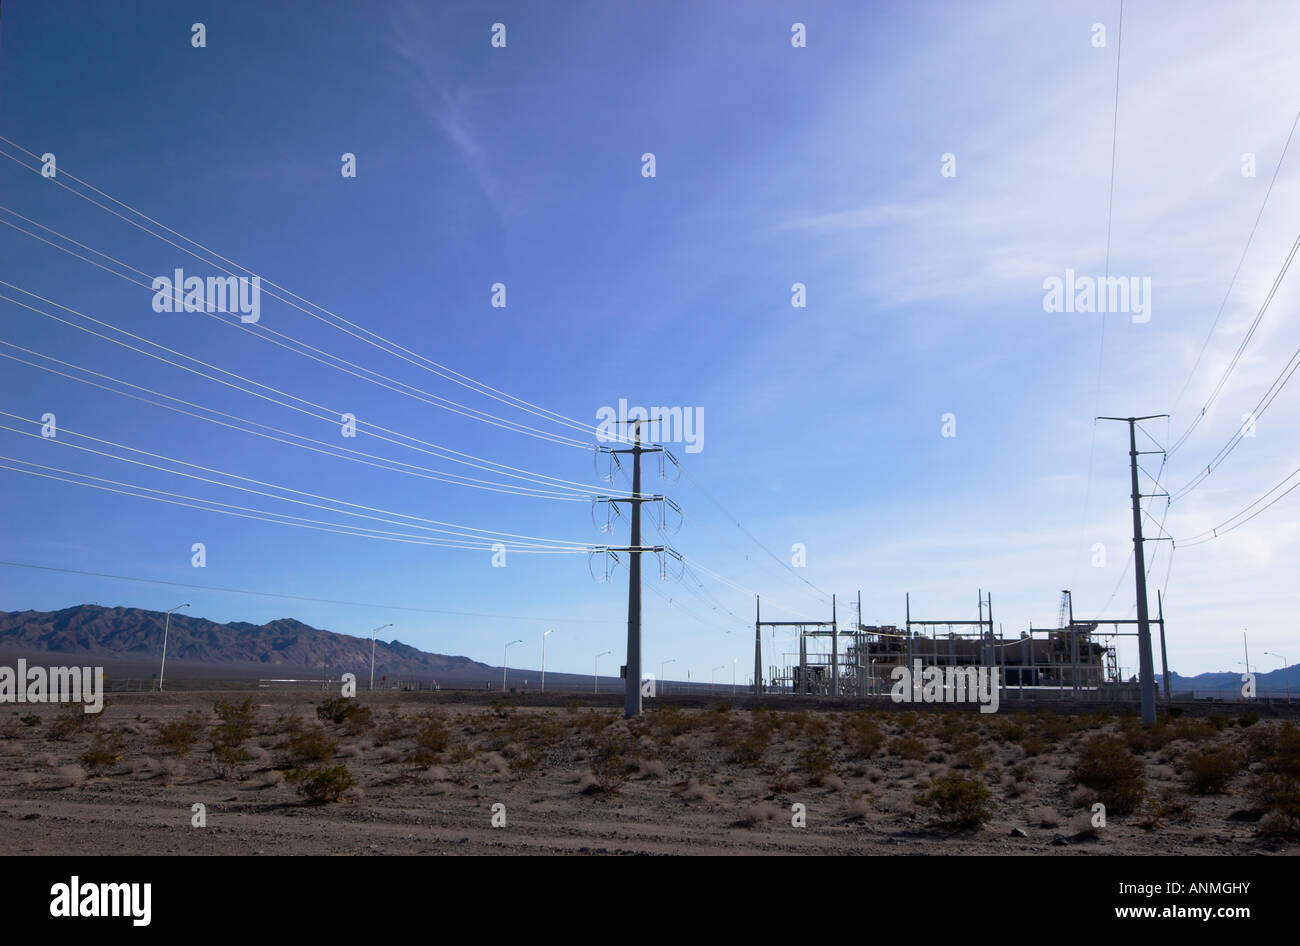 Combined cycle power plant in Mojave desert Stock Photo